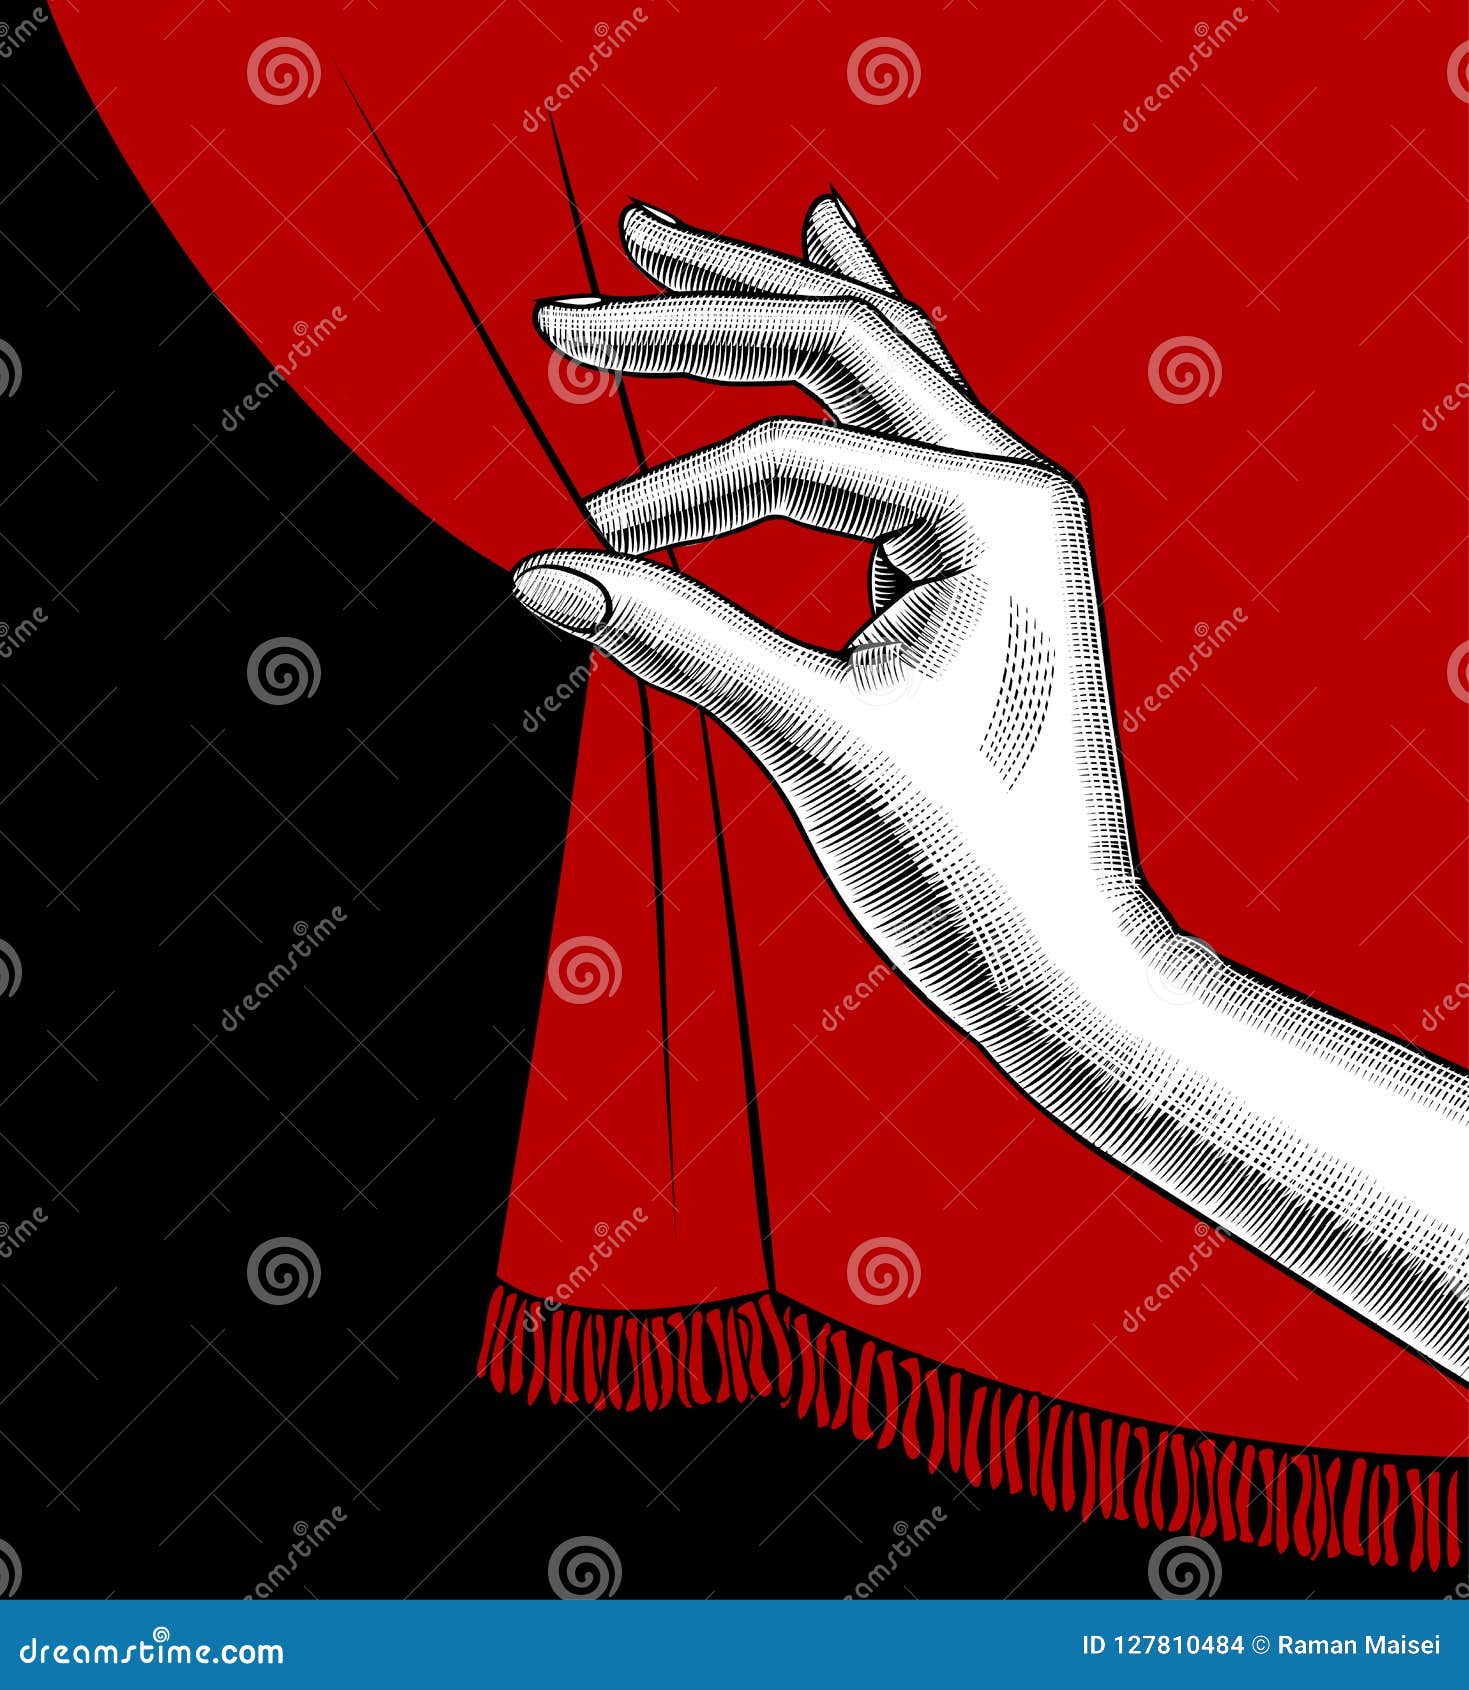 female hand pulling aside the red curtain on black background